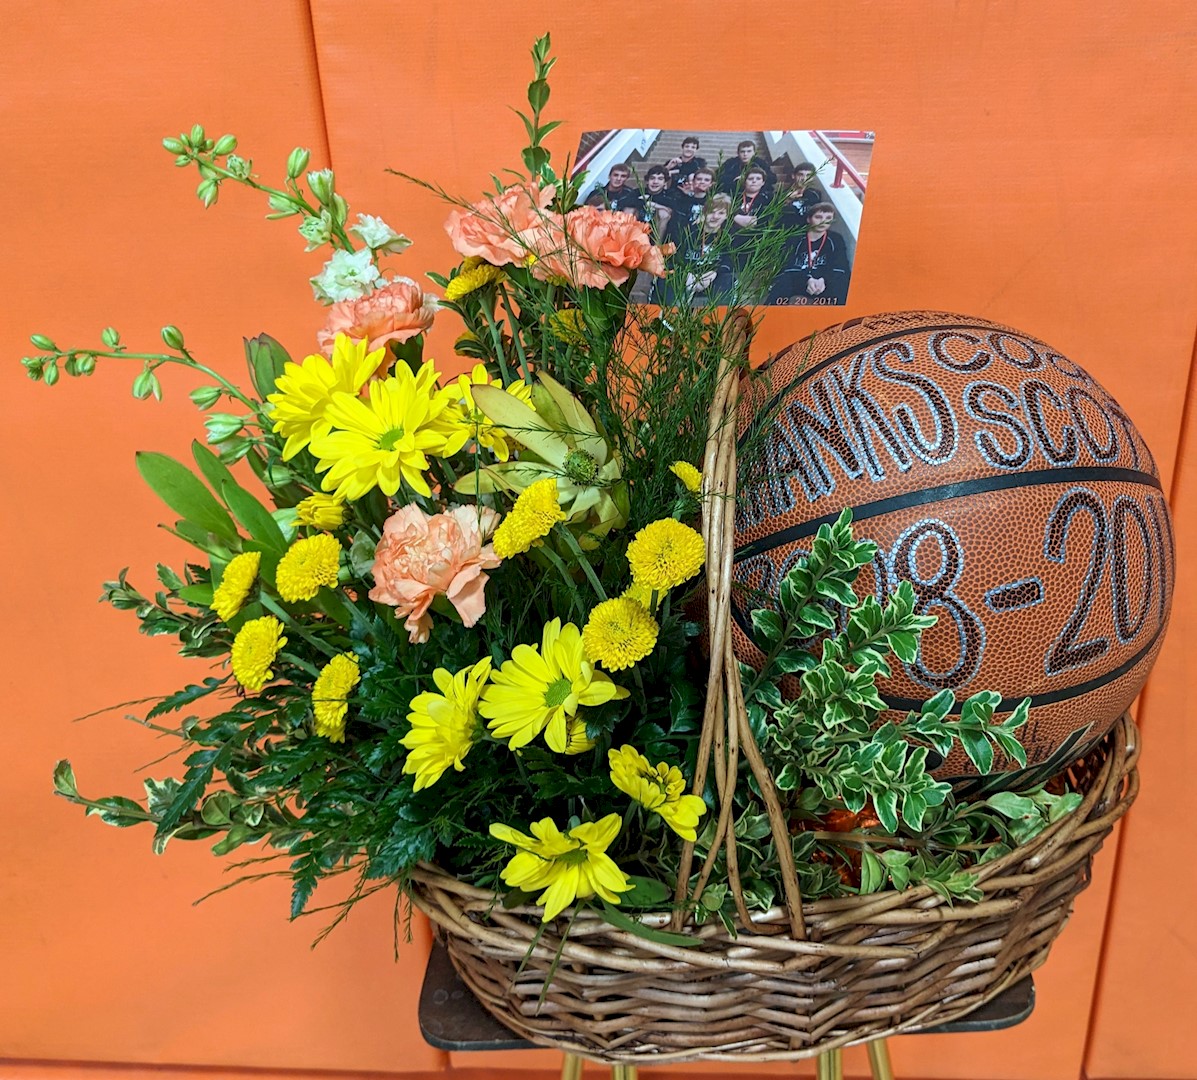 Flowers from Class of 2015 Boys Basketball